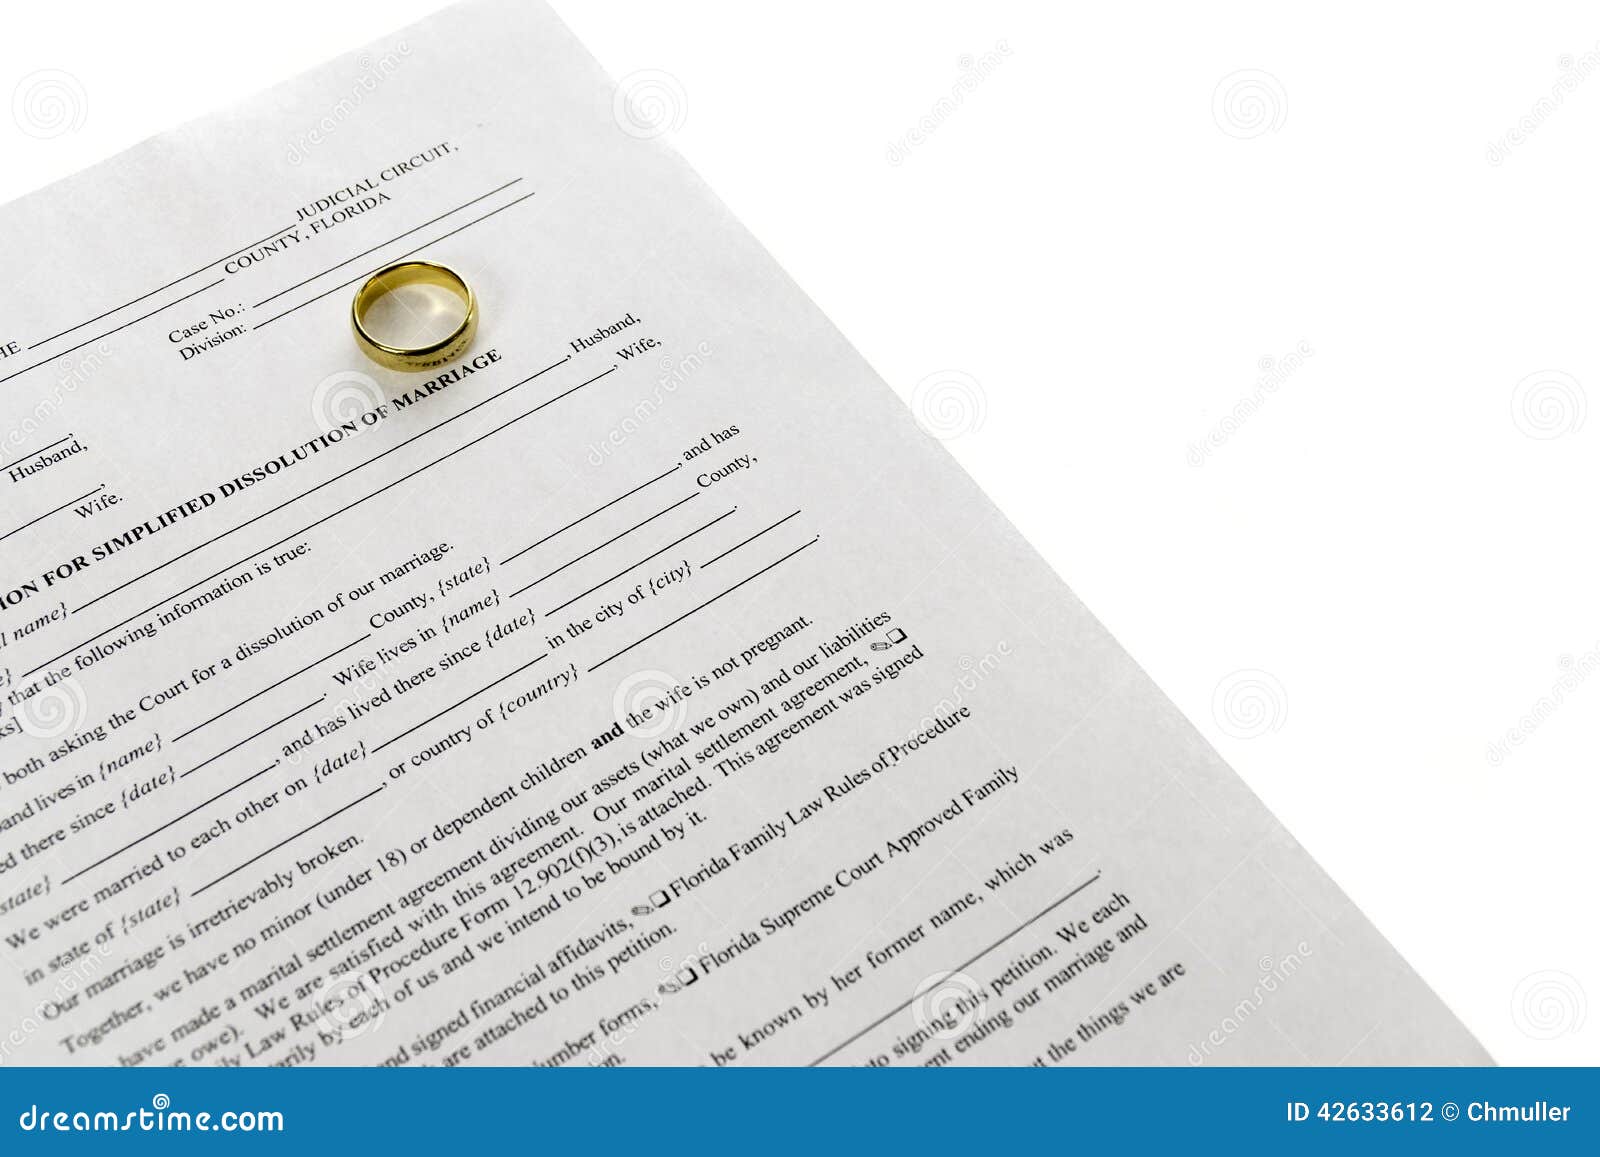  Divorce  Form With Single Wedding  Ring  Stock Photo Image 